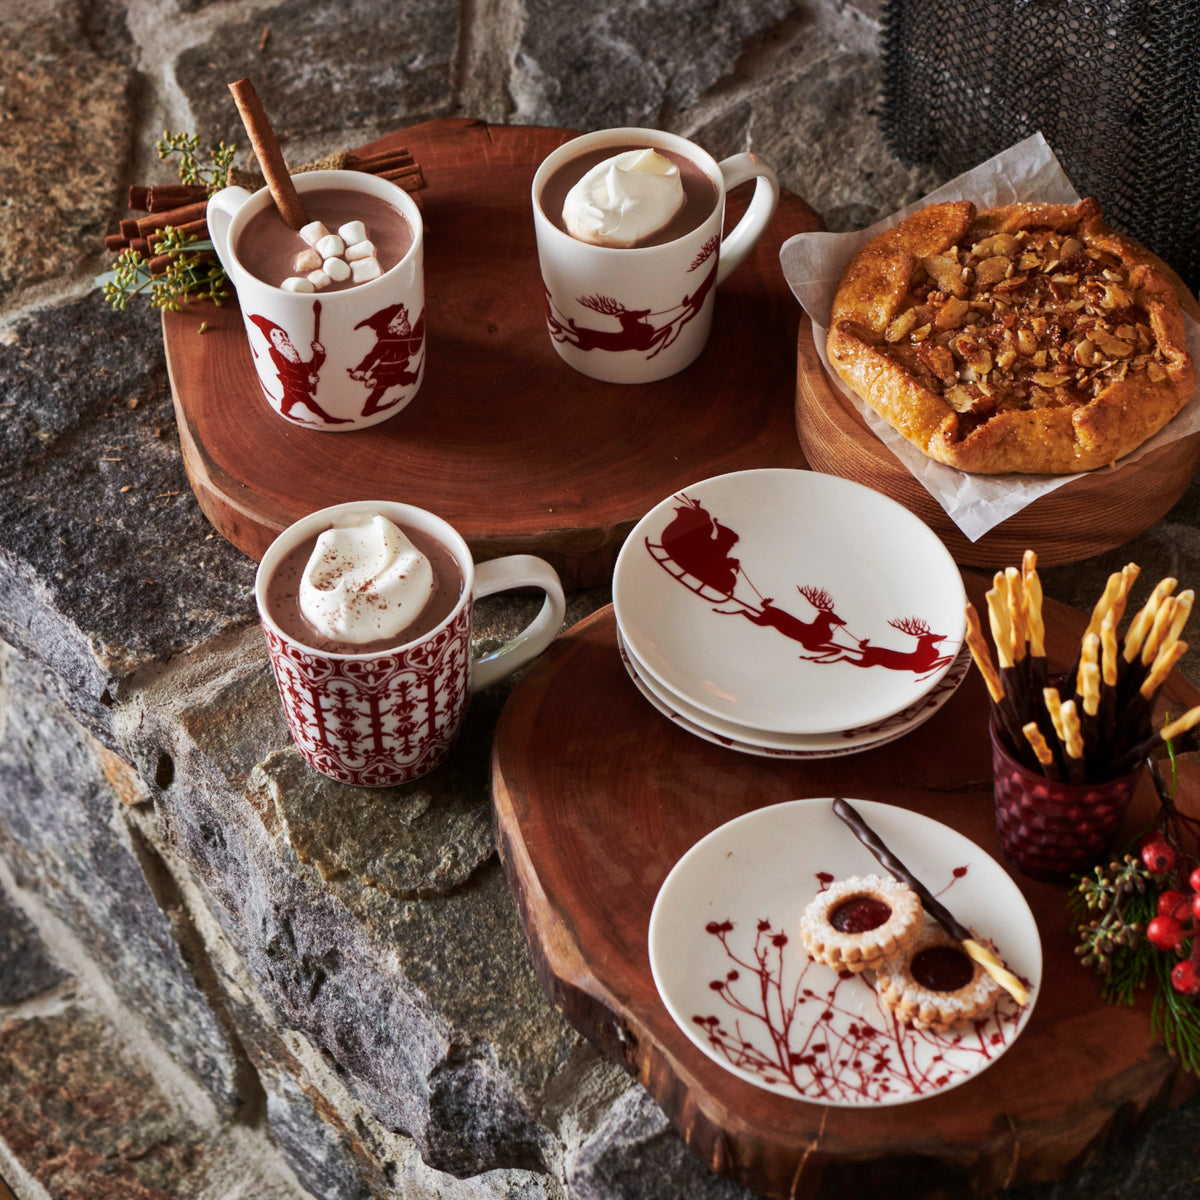 A cozy holiday-themed setup featuring mugs of hot chocolate, Caskata Artisanal Home Sleigh Small Plates with festive designs, a rustic wooden platter with cookies, a pastry, and breadsticks arranged on a stone surface.